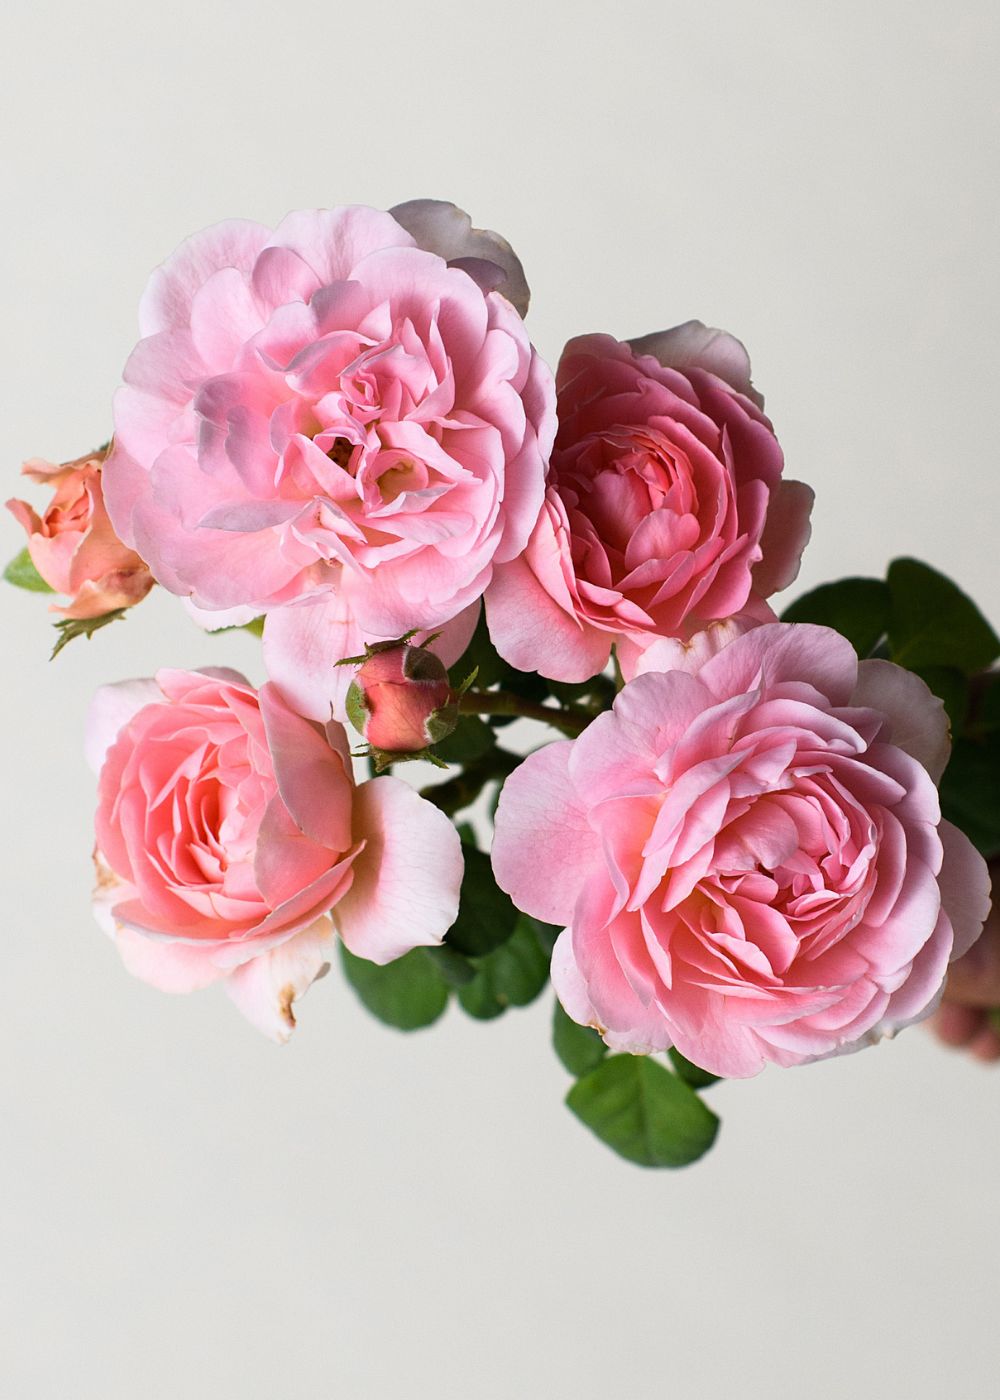 Queen Of Sweden Rose Potted - Menagerie Farm & Flower